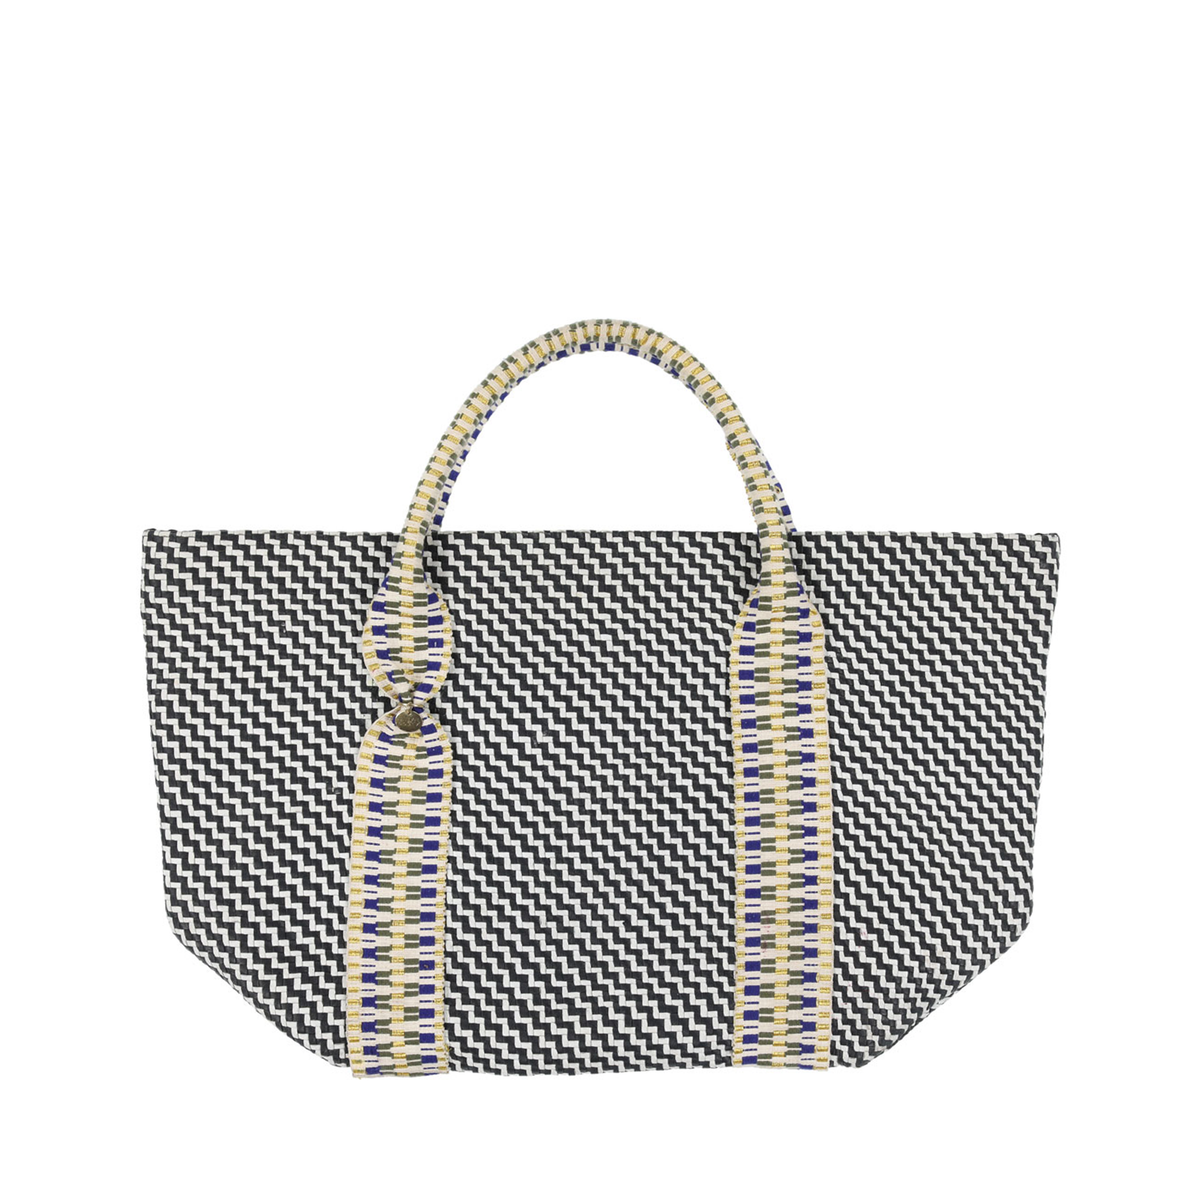 Misool Hand Woven Leather Tote Bag in Navy & White by STELAR